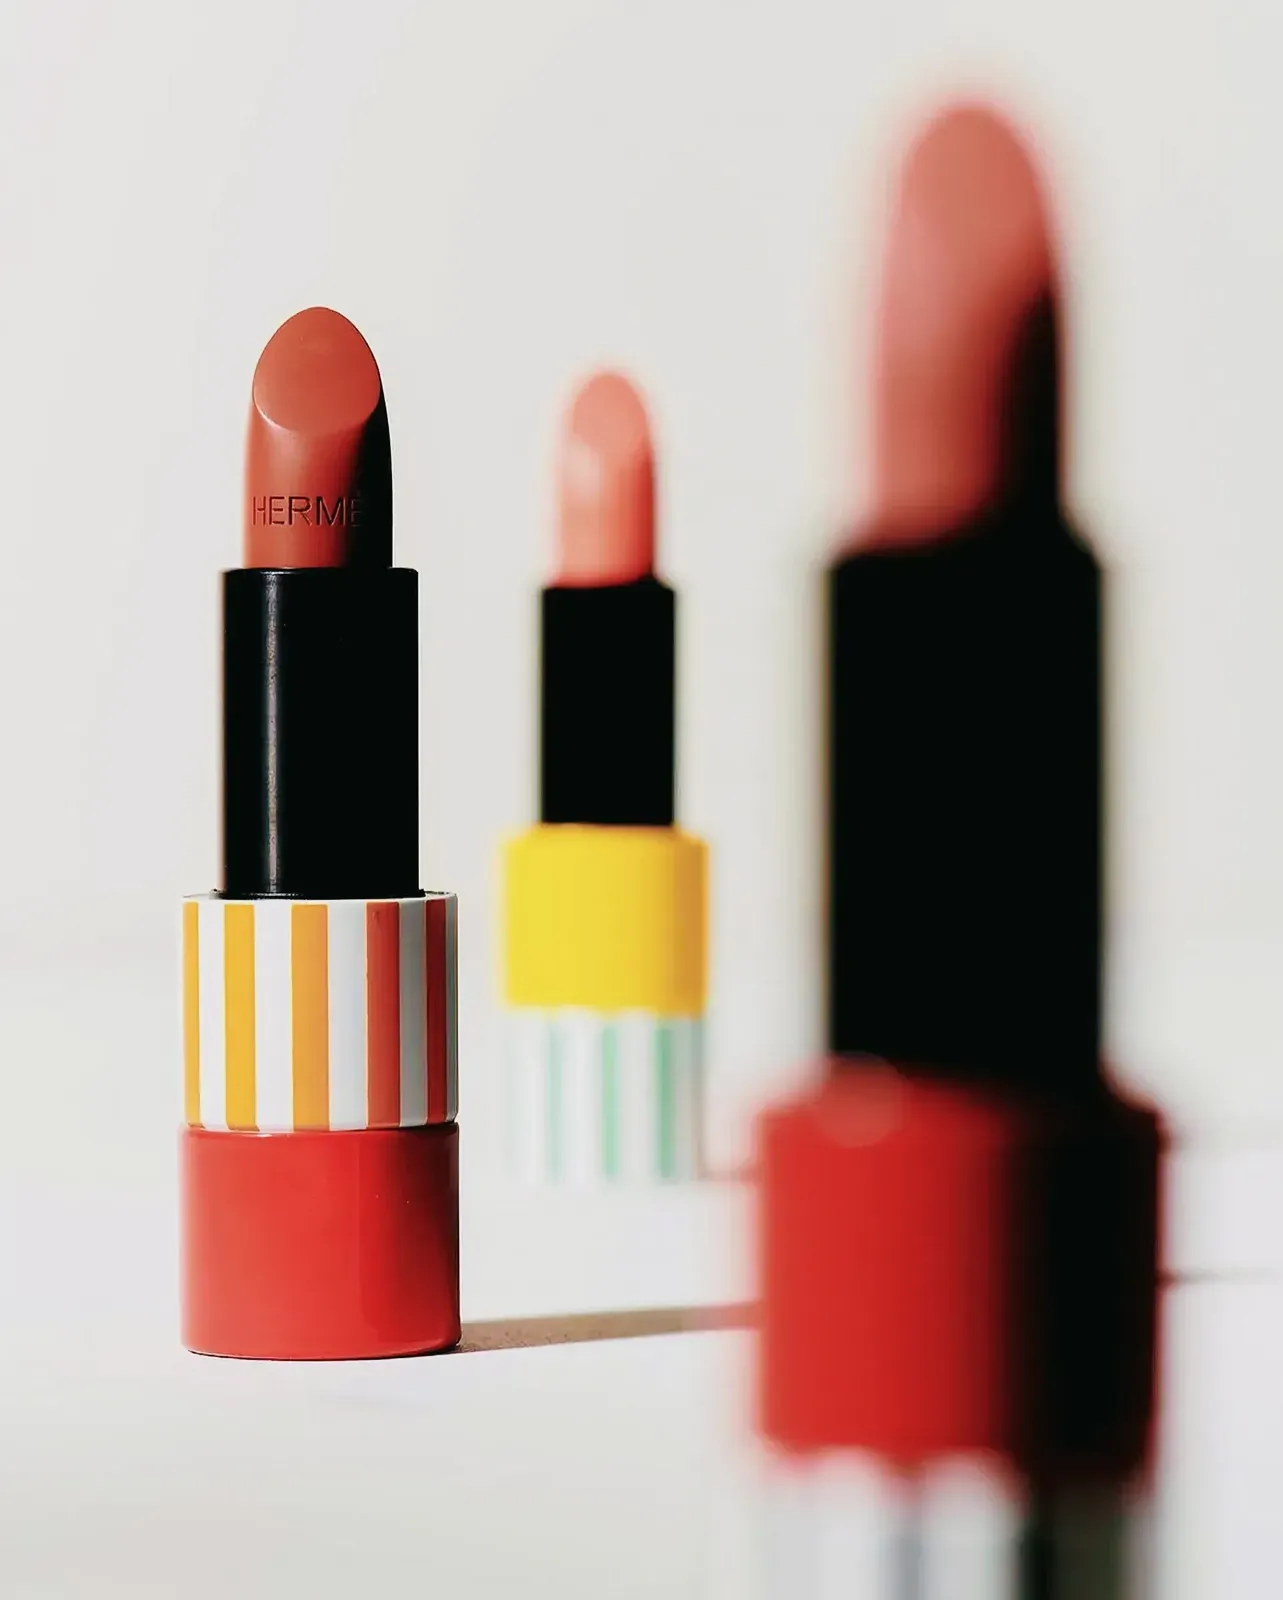 Enticing array of lipsticks displayed against a pristine white background.